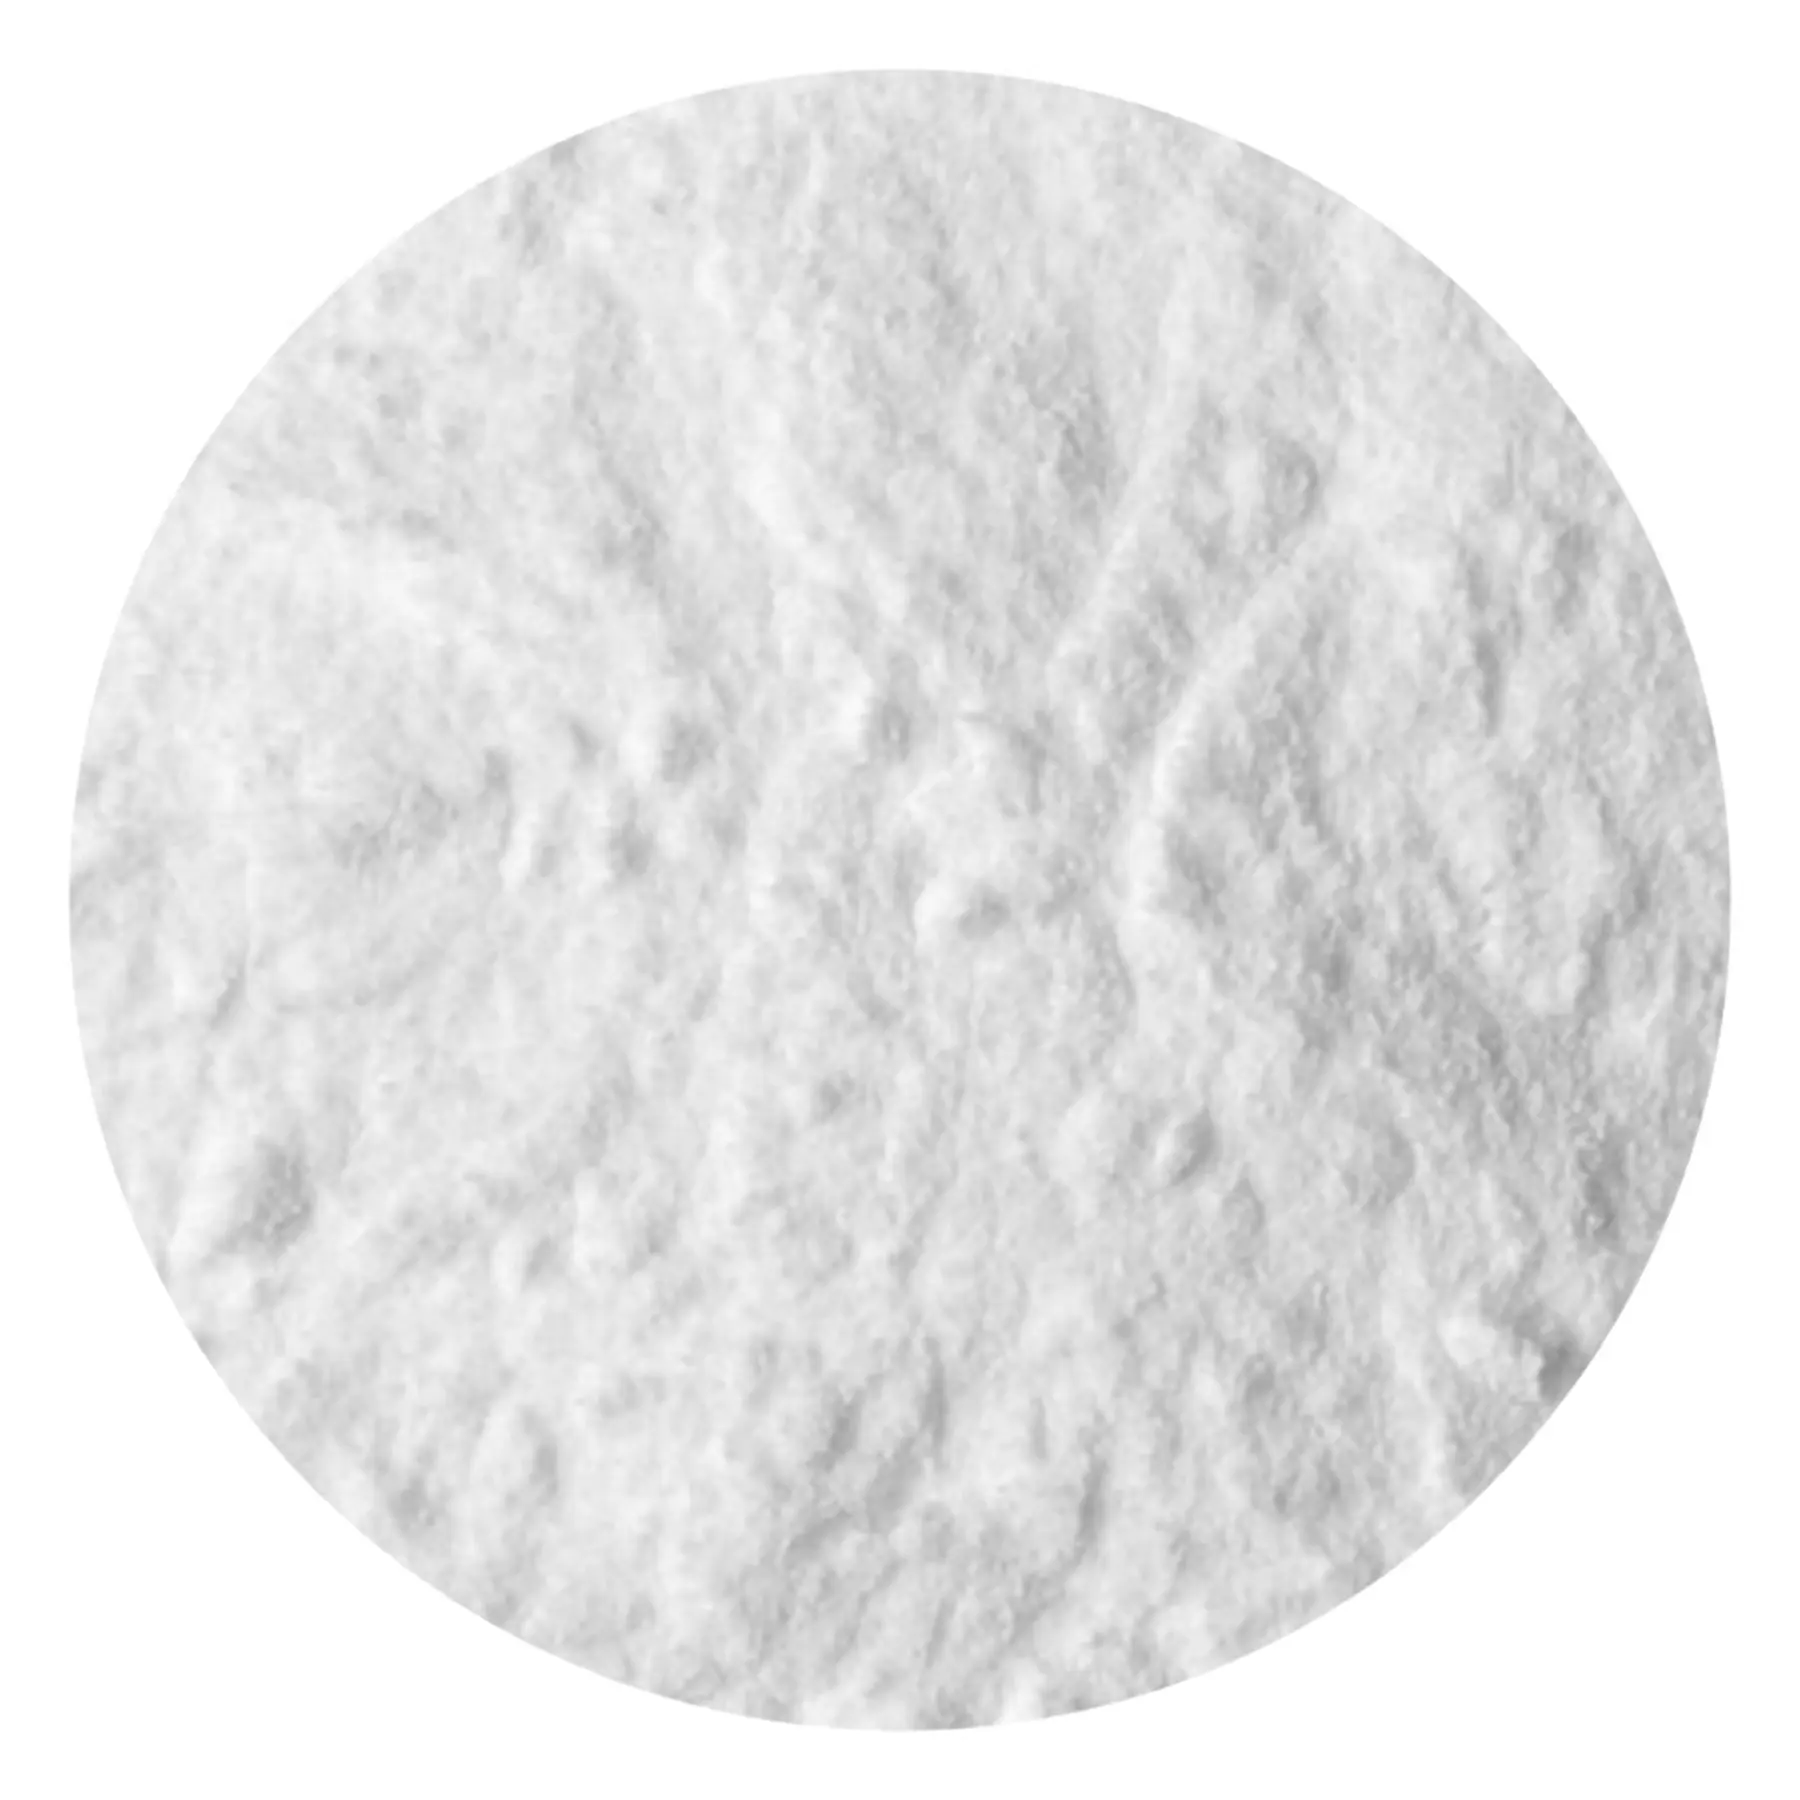 Feed Additive Calcium Butyrate Cas No 5743-36-2 Calcium Butyrate Hopa additives for poultry feed